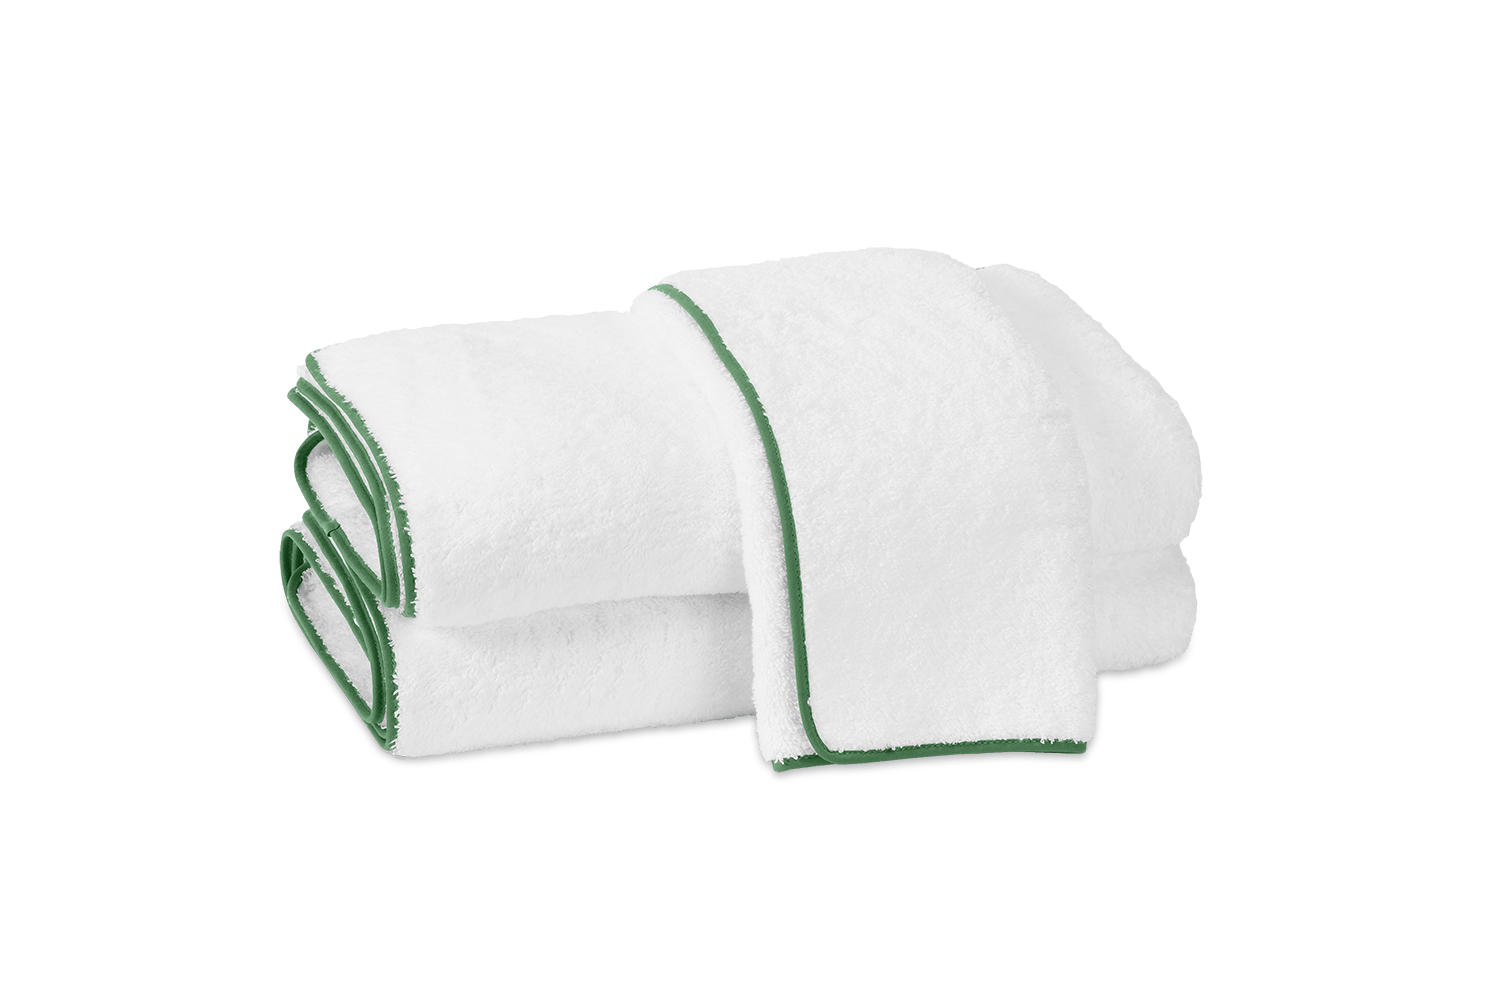 https://matouk-website.imgix.net/spree/products/11432/original/Cairo_Towels_White_Palm_01.png?1679506452